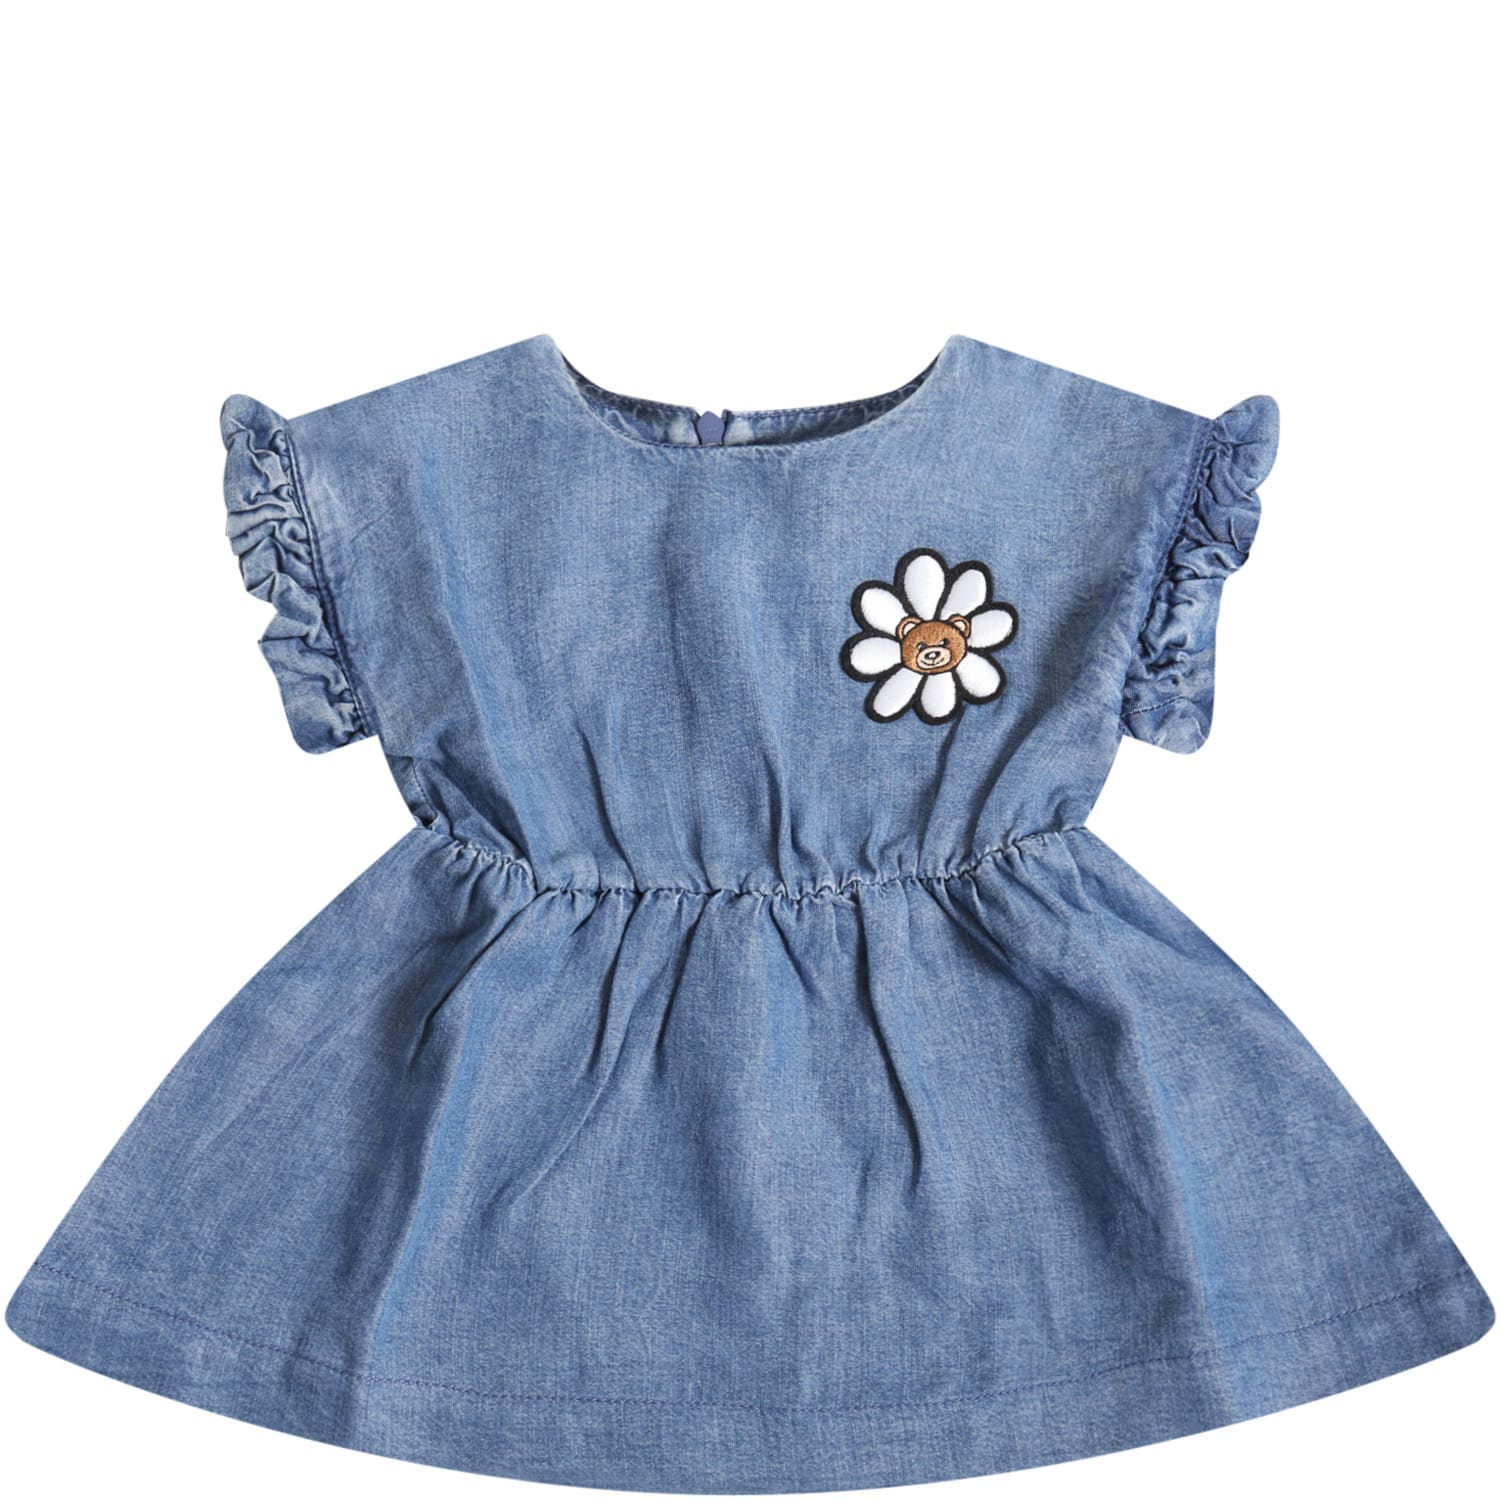 Moschino Light Blue Dress For Babygirl With Flower